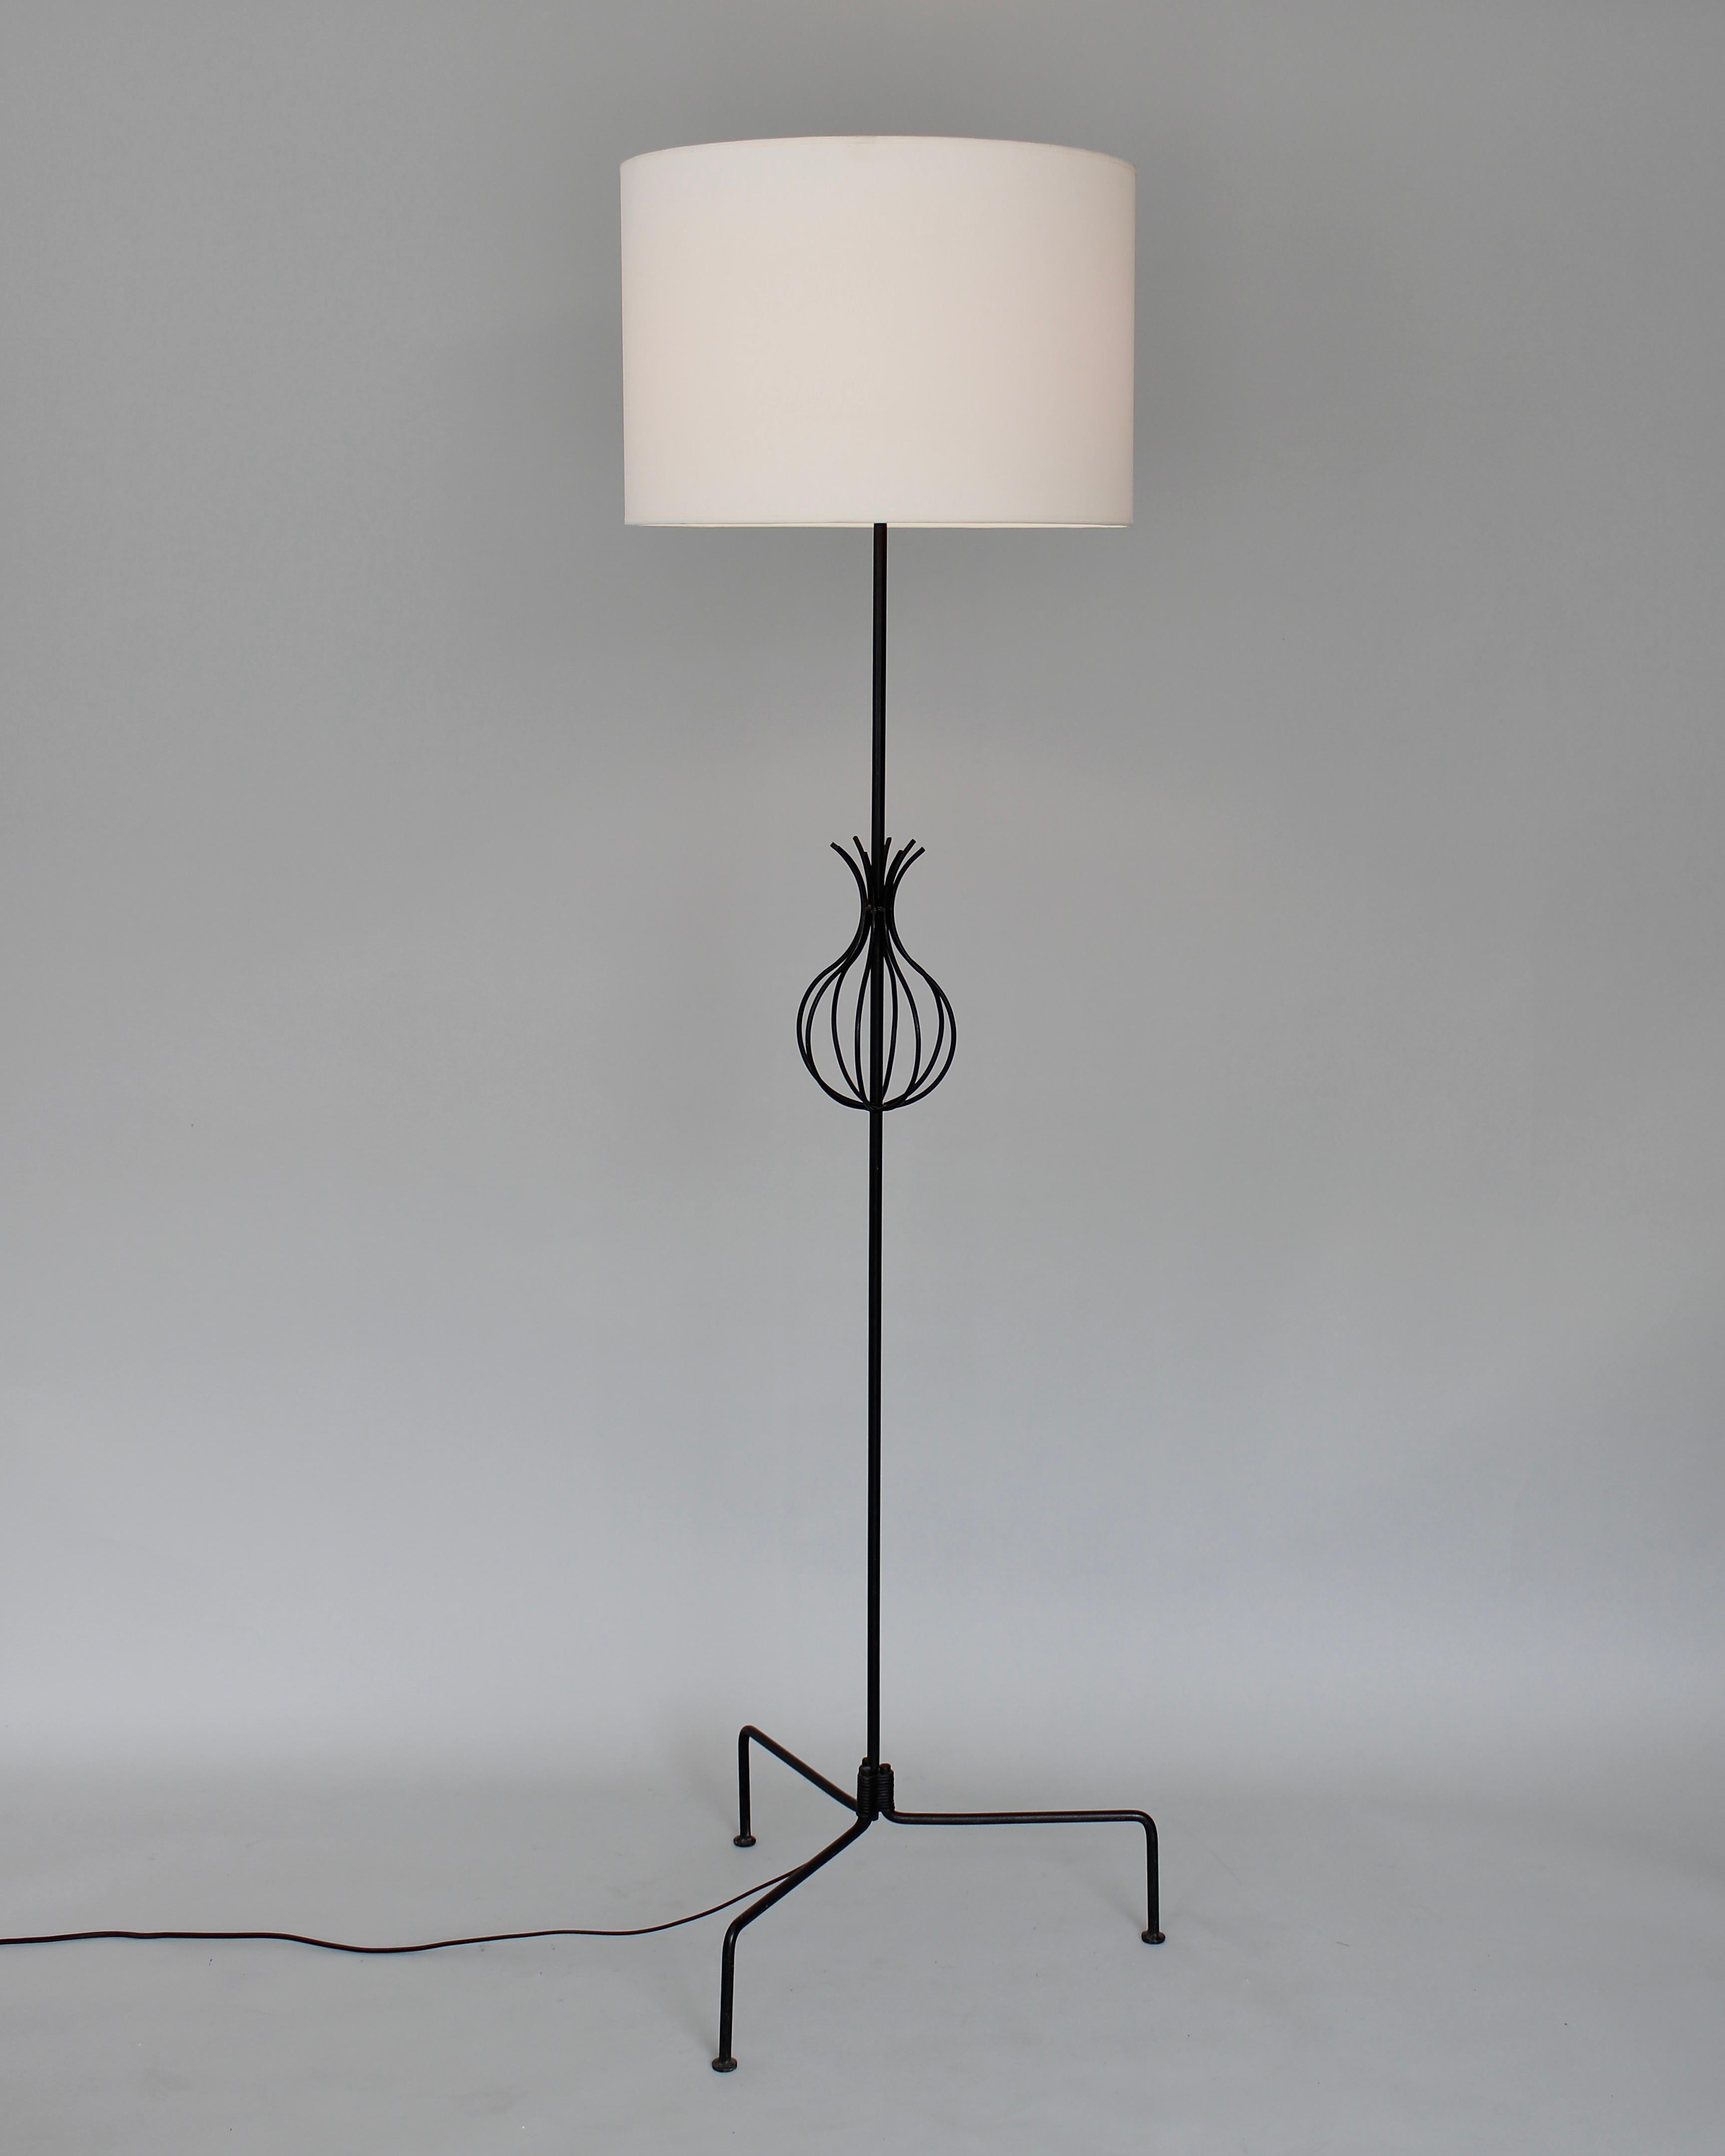 Interesting French floor lamp in black wrought iron with a pineapple or basket motif in the central portion on splayed legs. Very architectural. 
Attributed to Rene Jean Caillette, circa 1950
64